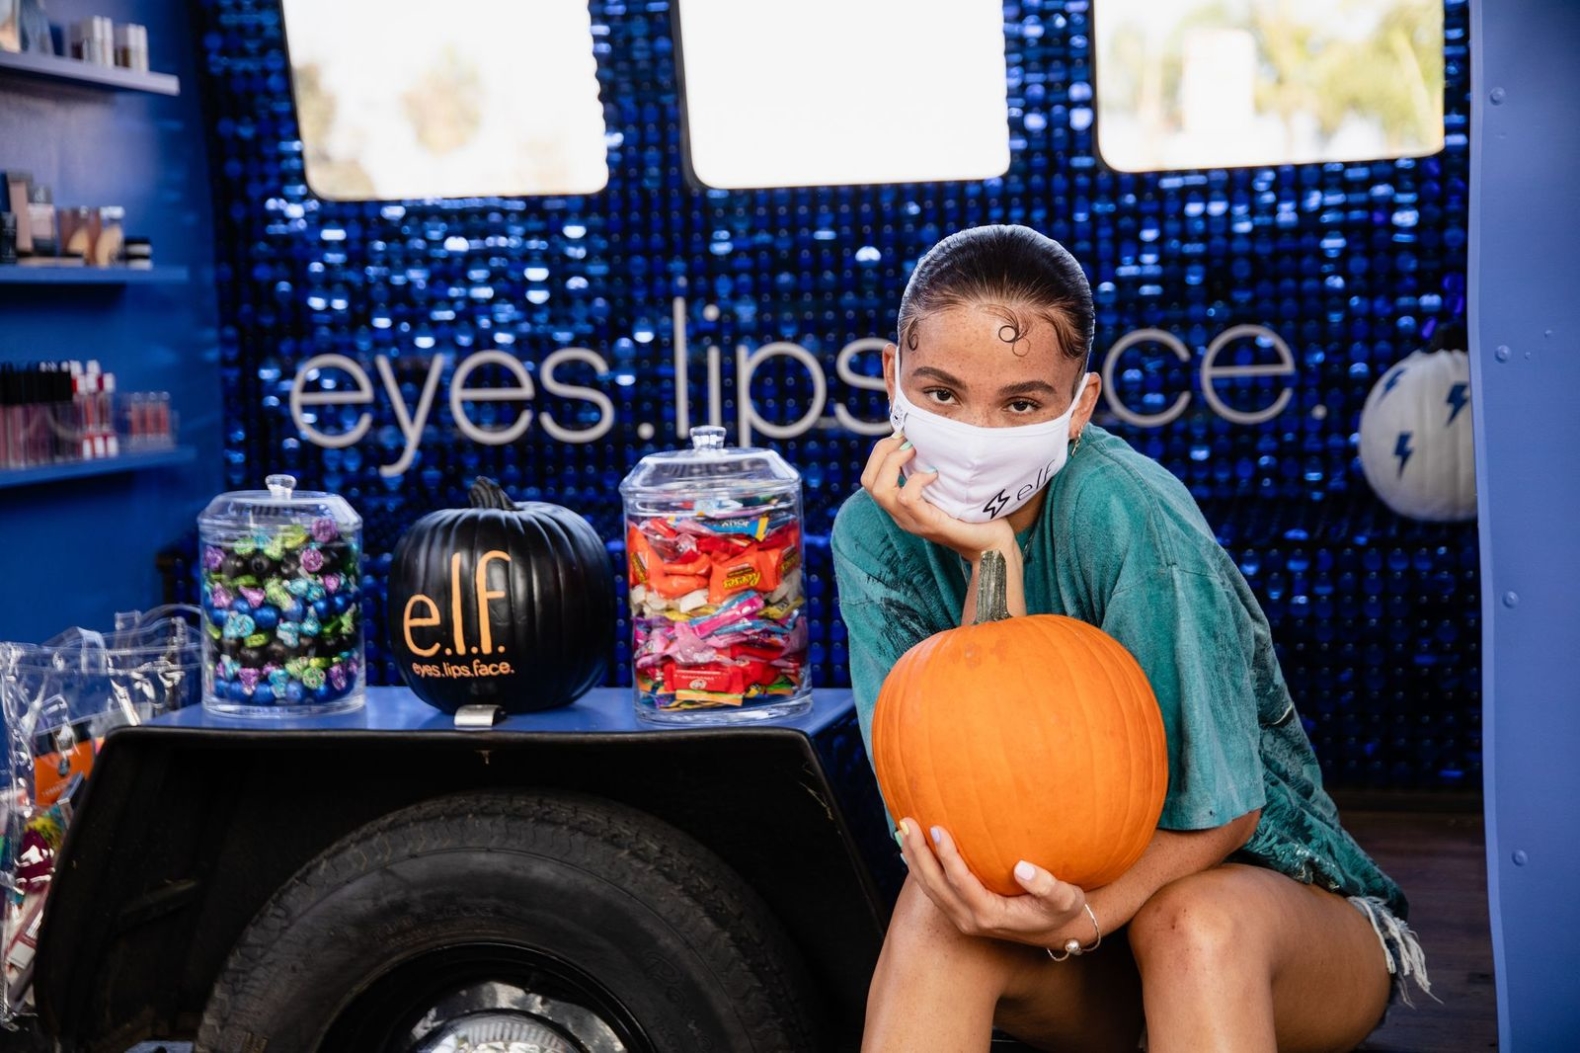 female presenting person wearing teal shirt and white e.l.f. branded face mask, holding orange pumpkin while sitting inside pop-up vehicle with purple sparkly wall behind her with the words "eyes lips face" in white.